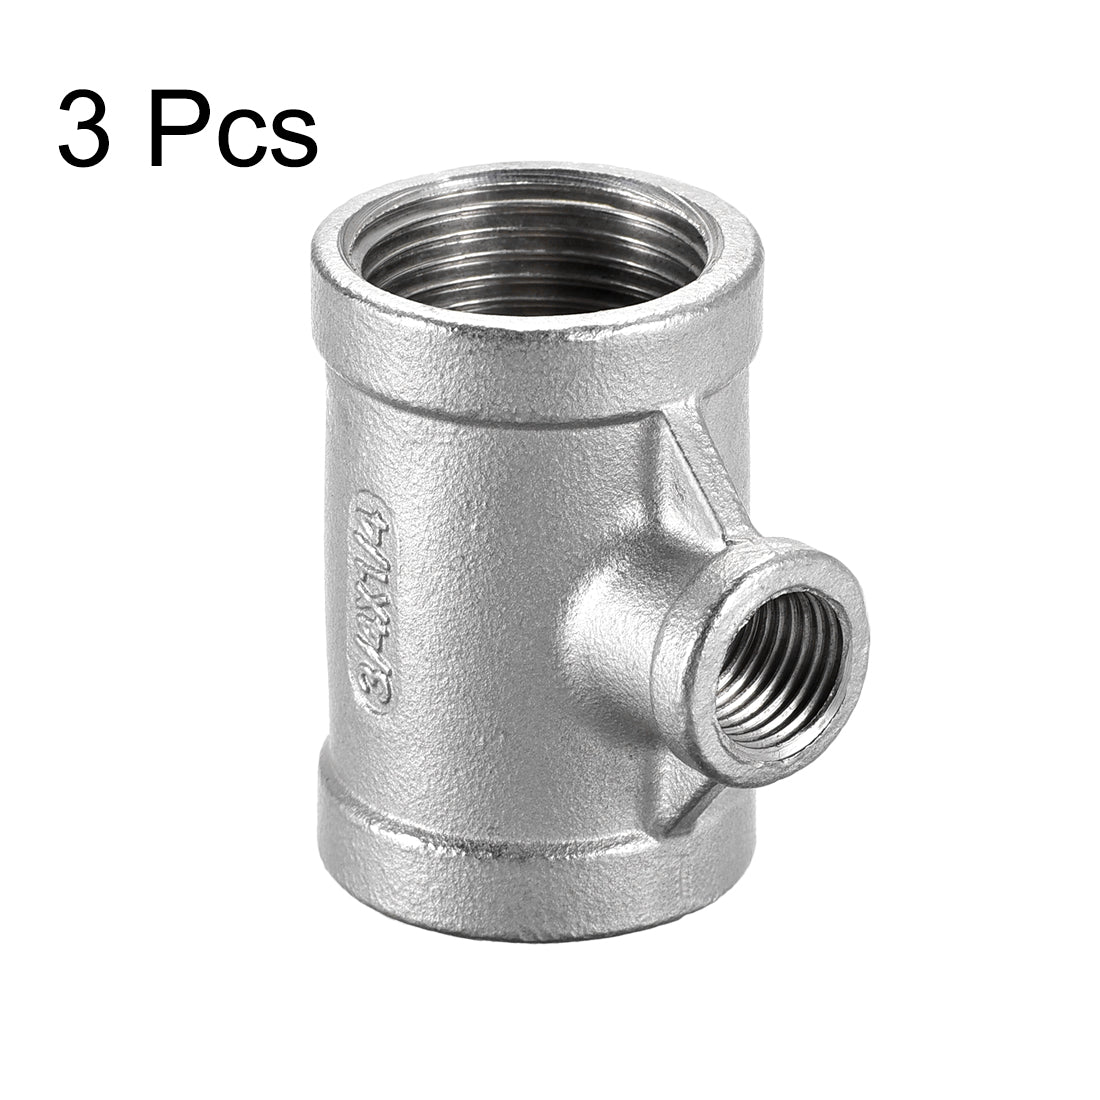 uxcell Uxcell Stainless Steel 304 Cast  Pipe Fitting 3/4 BSPT x 1/4 BSPT x 3/4 BSPT Female Tee Shaped Connector Coupler 3pcs